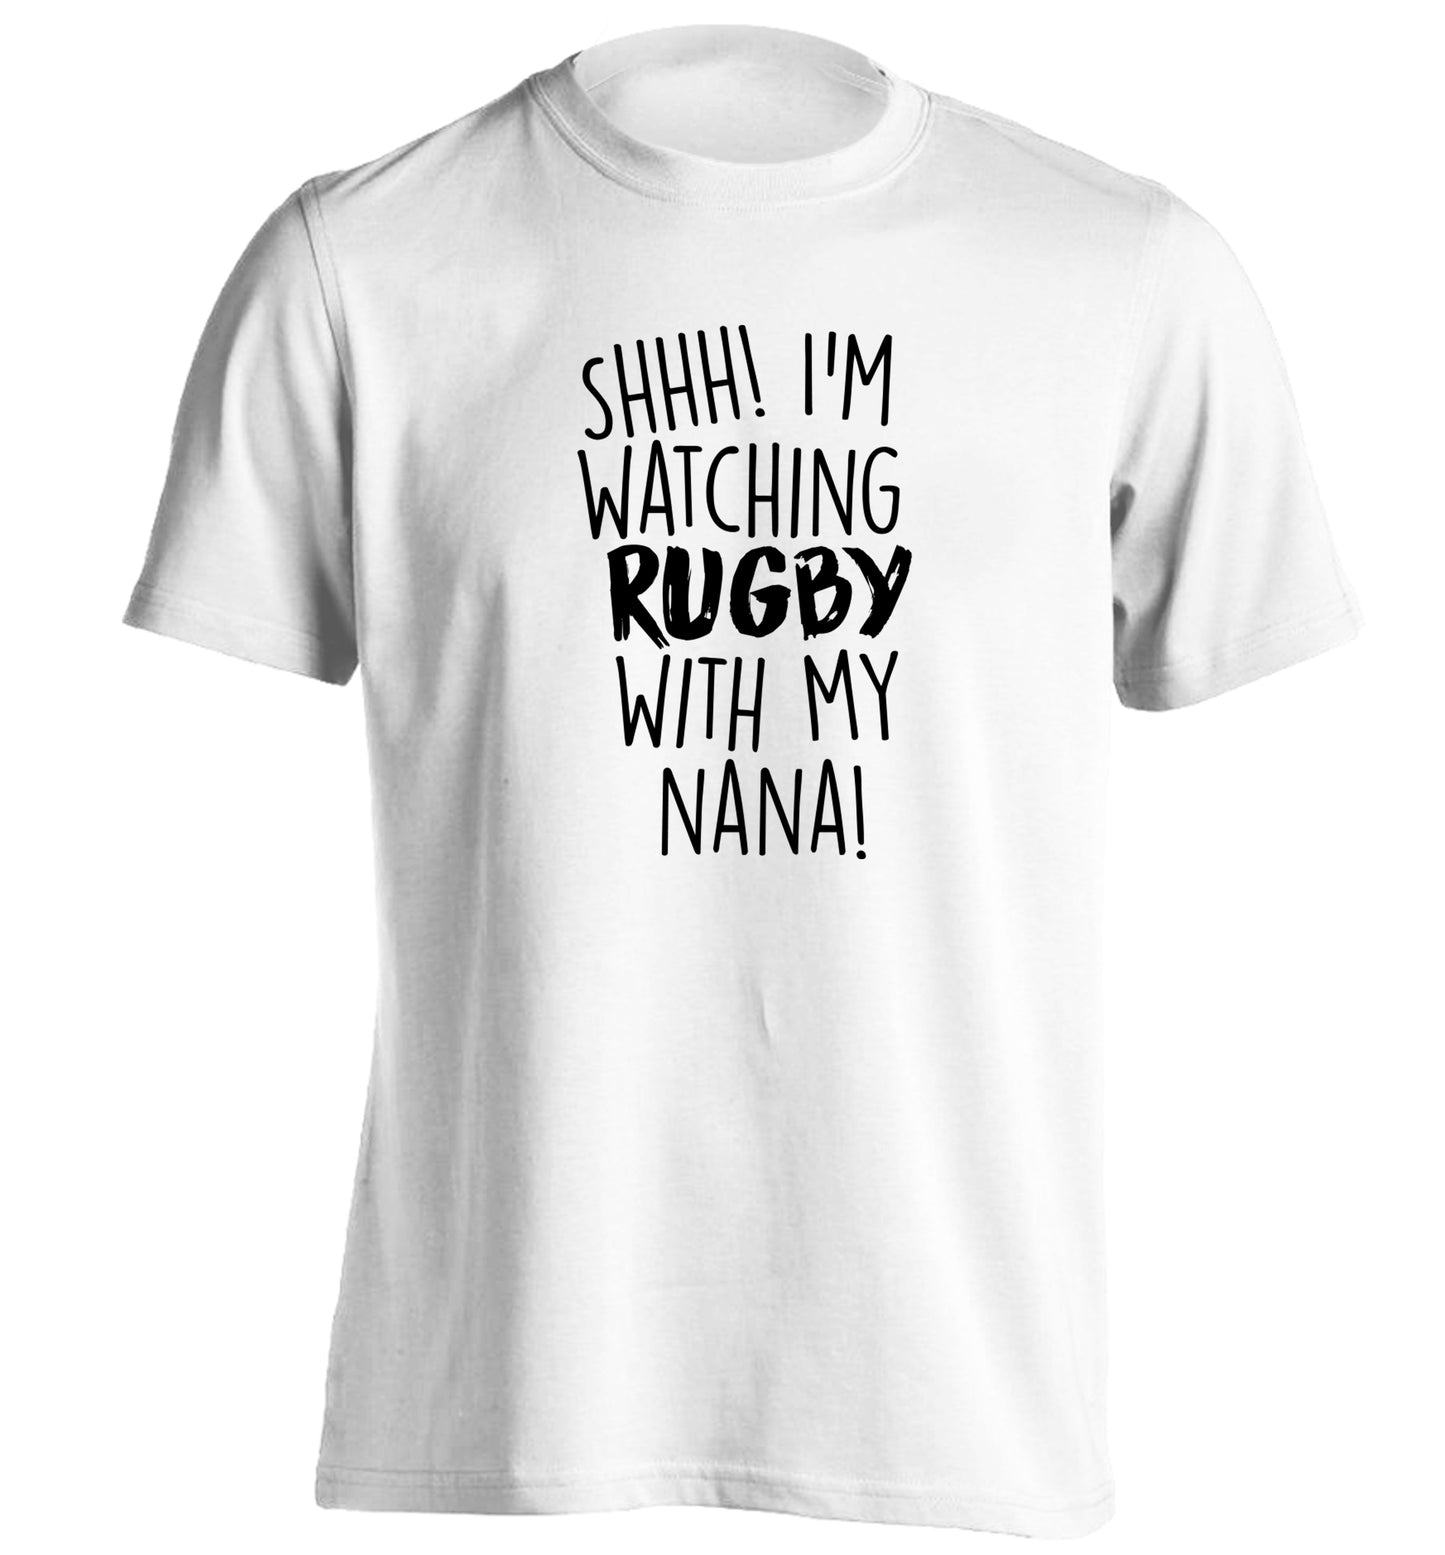 Shh I'm watching rugby with my nana adults unisex white Tshirt 2XL